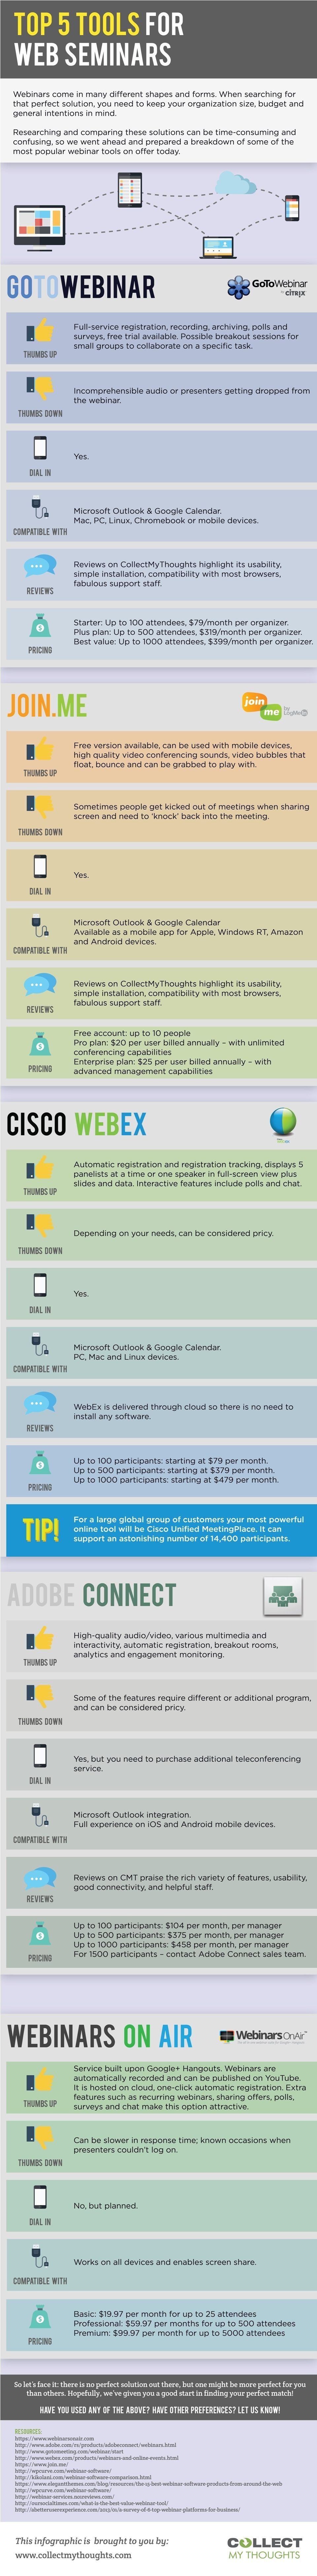 Top 5 Tools for Webinars Infographic